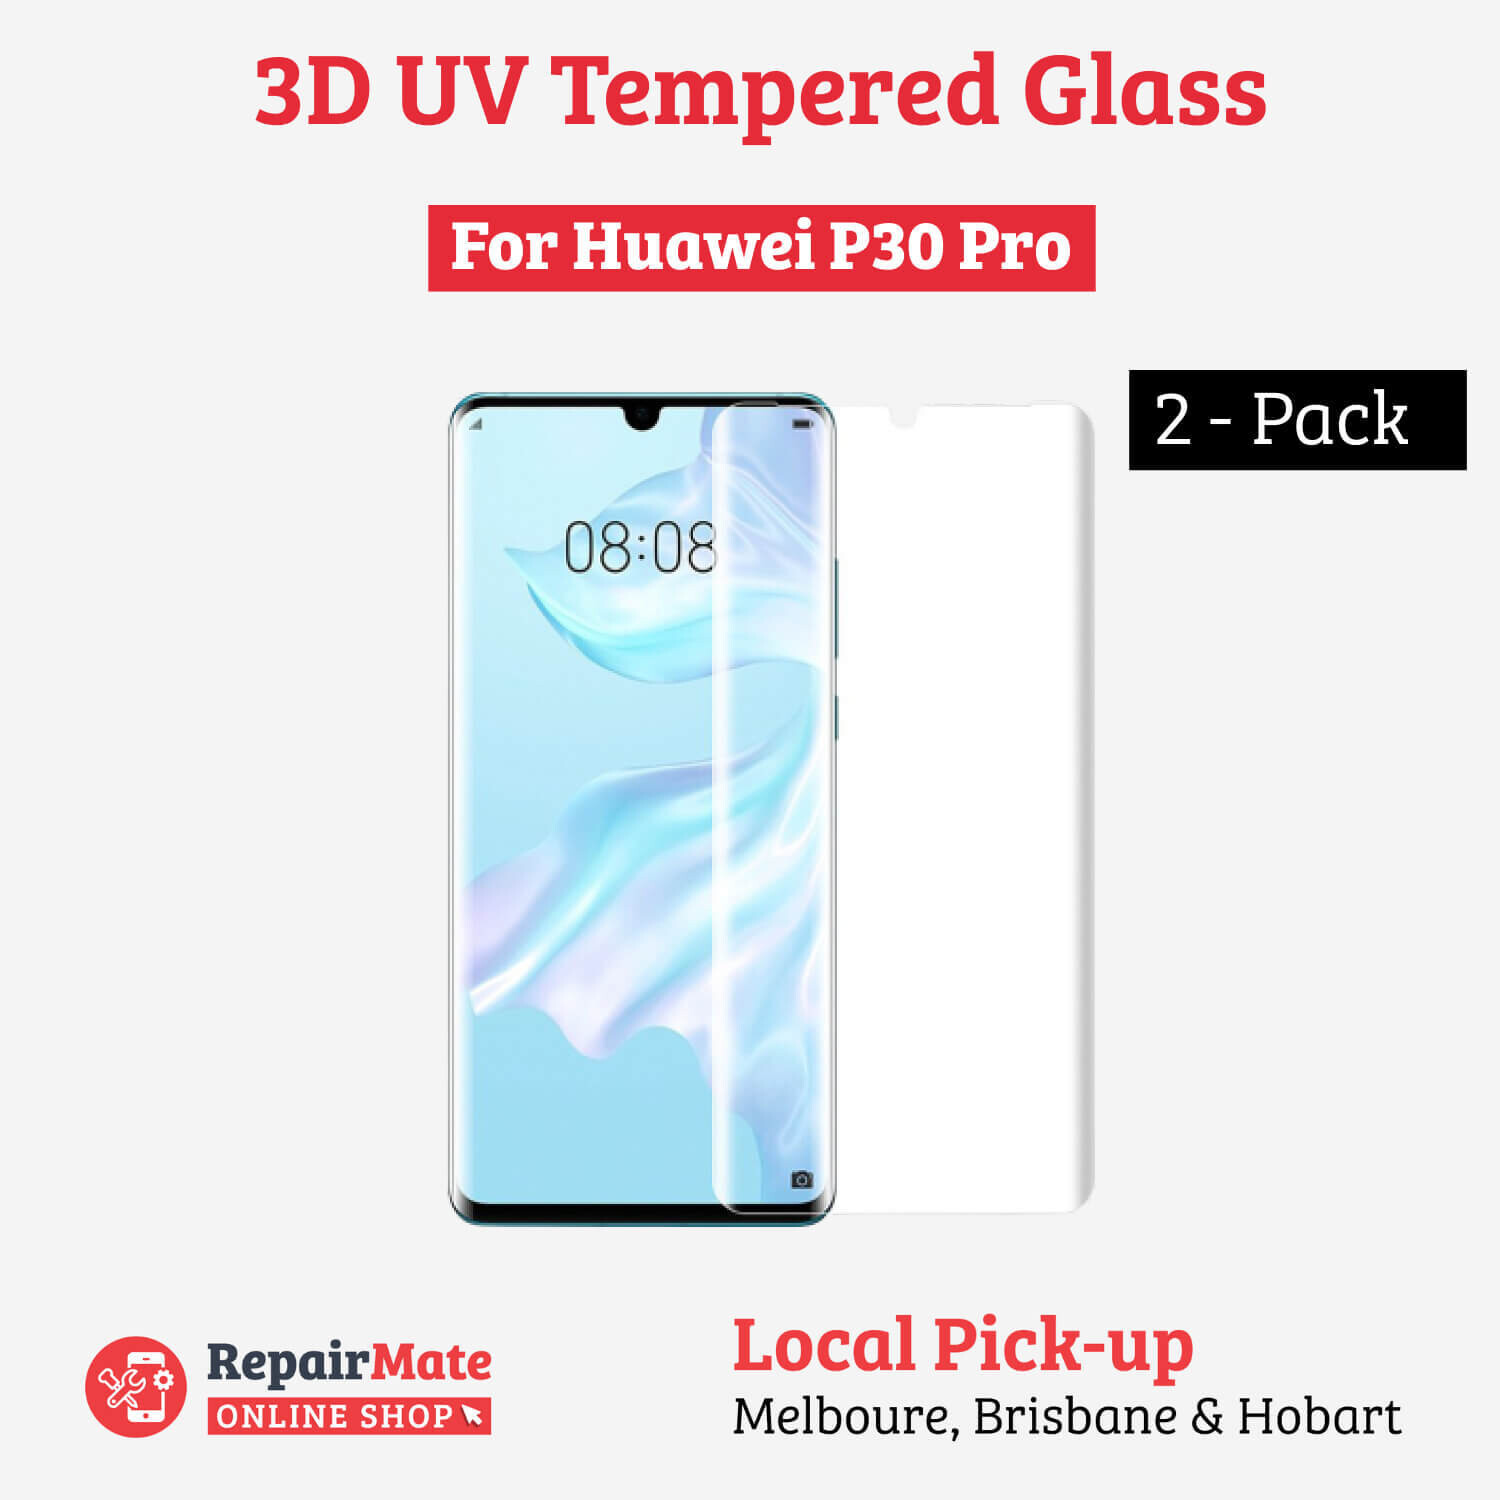 Huawei P30 Pro 3D UV Tempered Glass